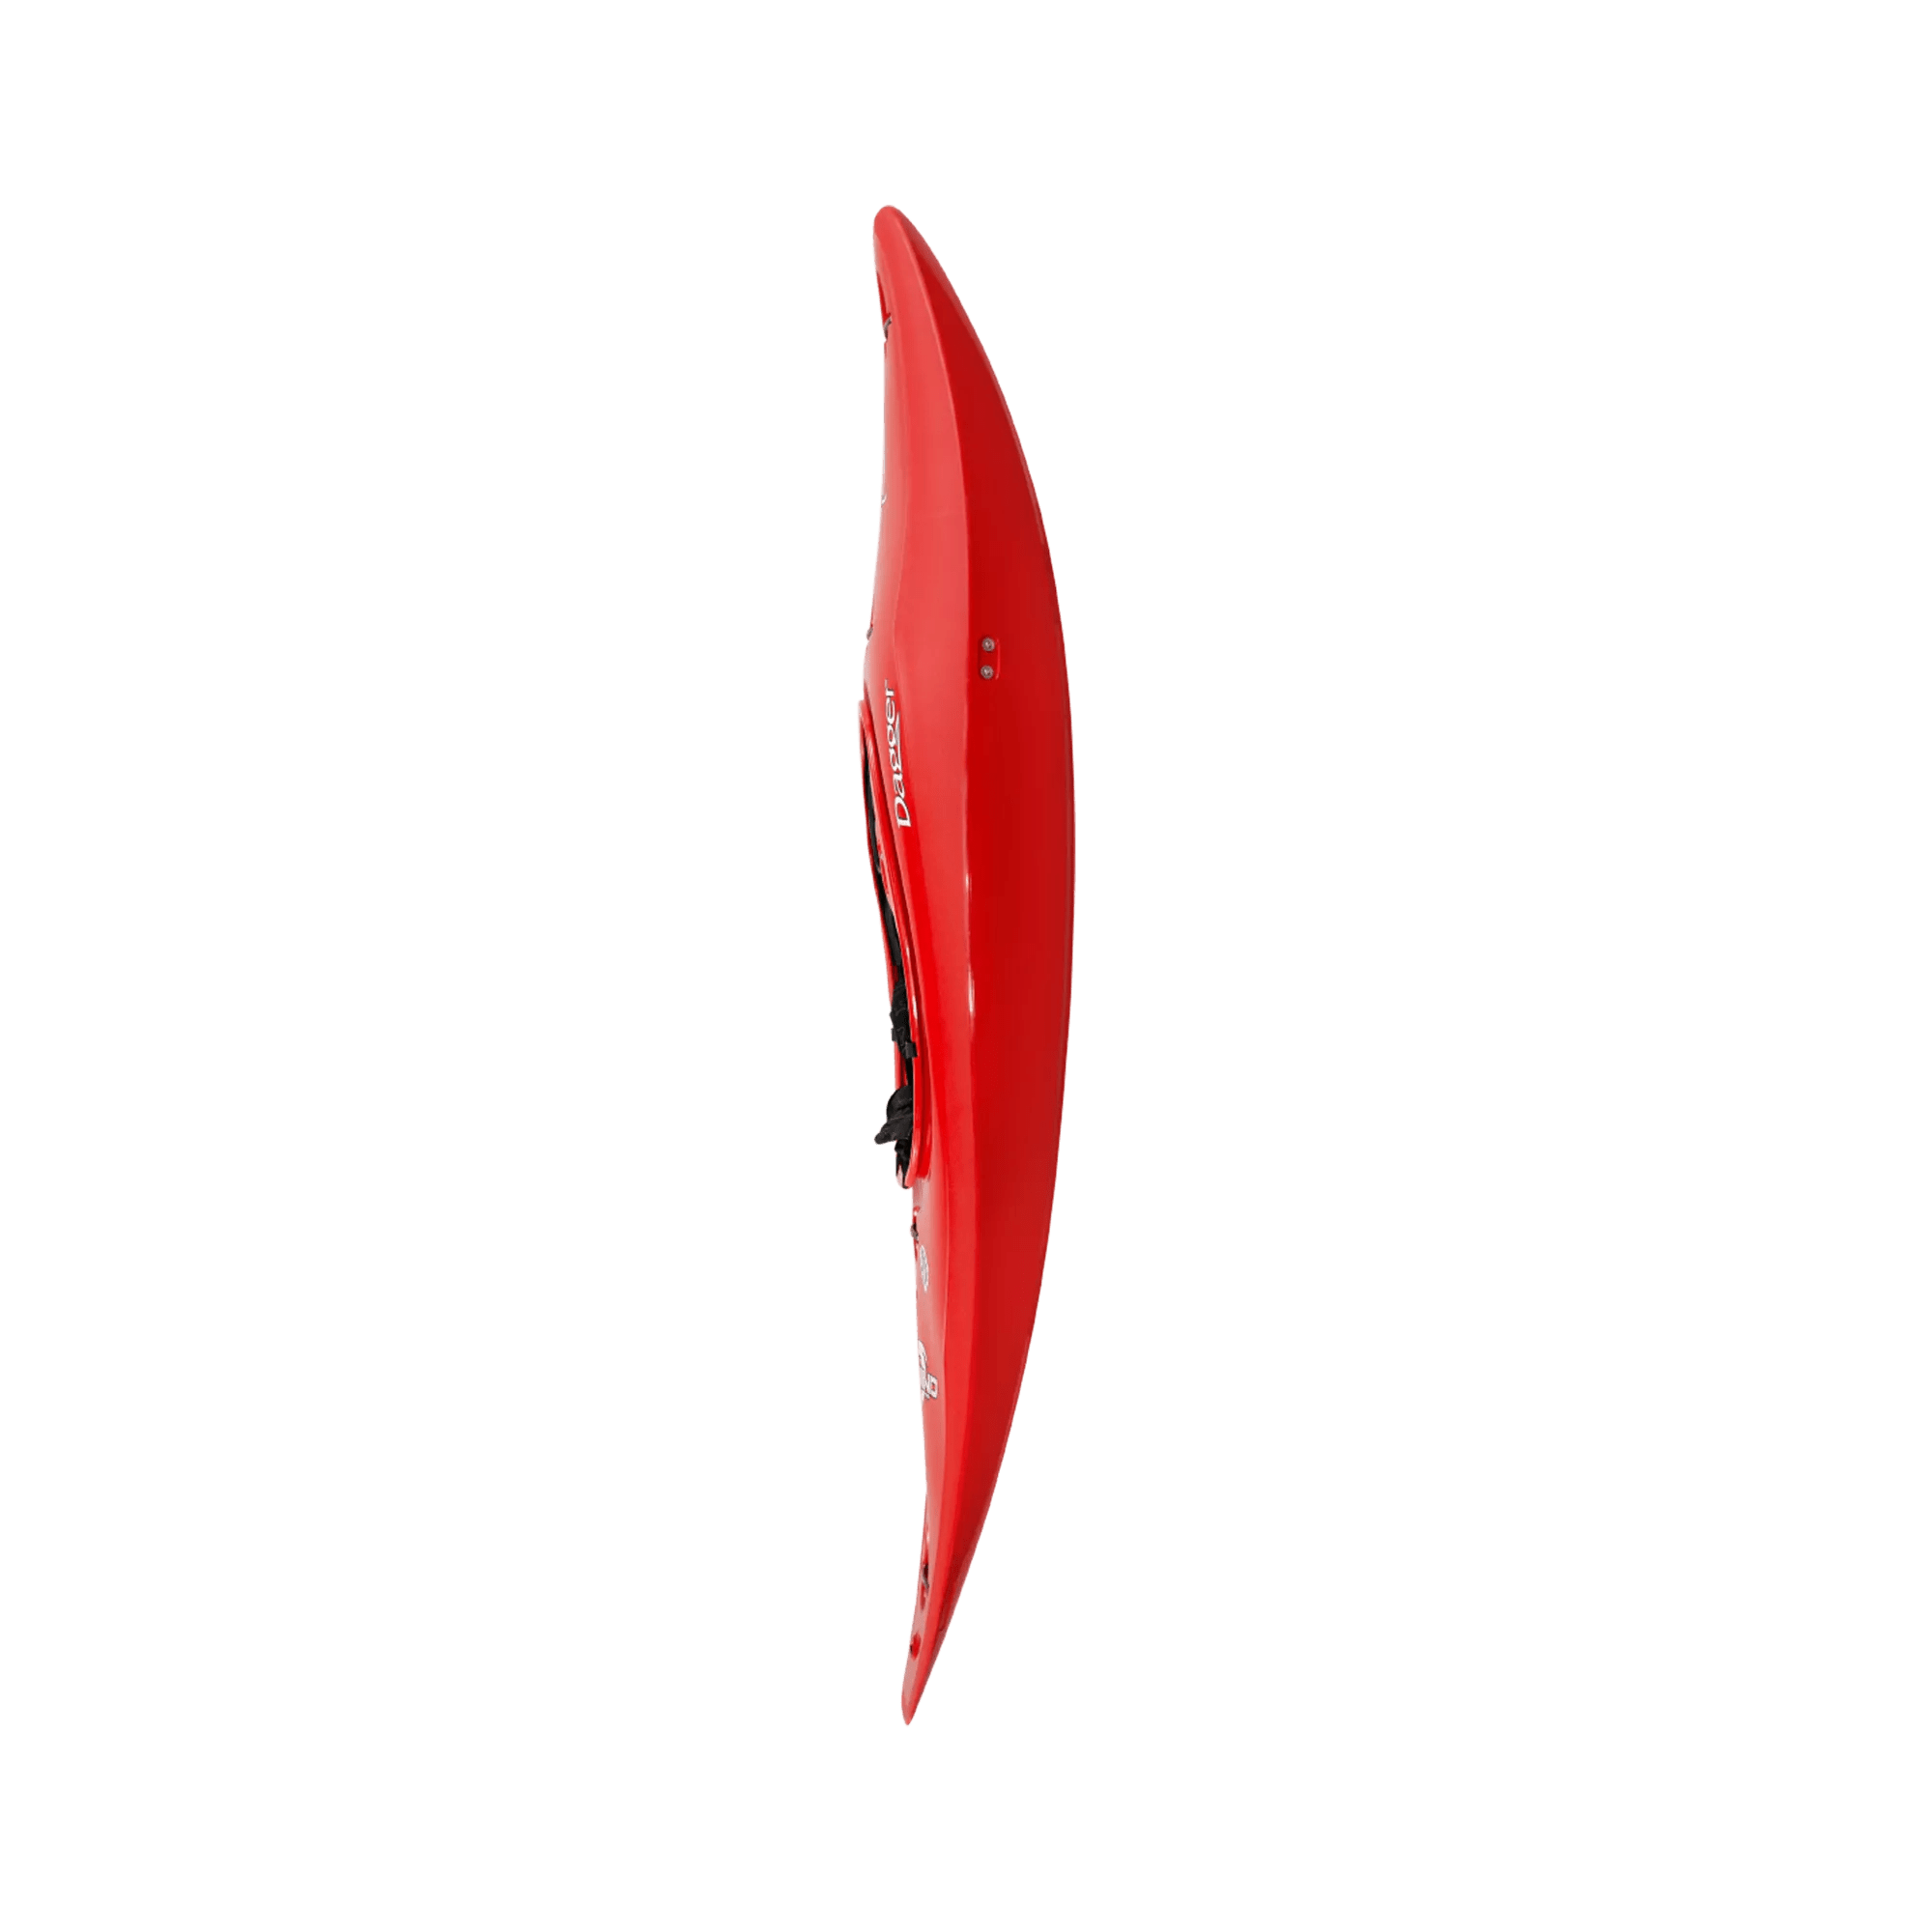 DAGGER - Rewind MD River Play Whitewater Kayak - Red - 9010340057 - SIDE